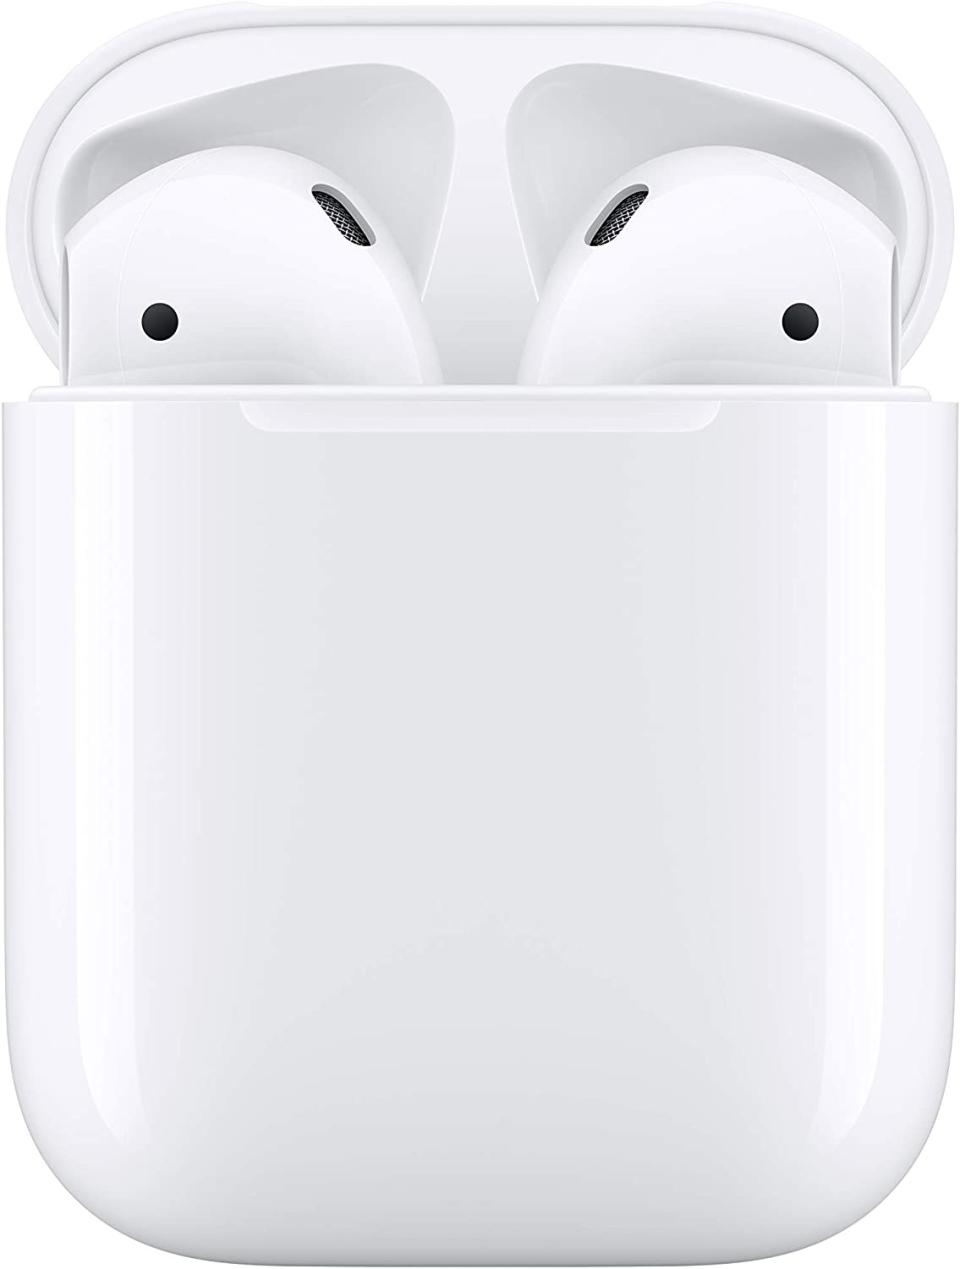 Save 10% on Apple AirPods with Charging Case. Image via Amazon.